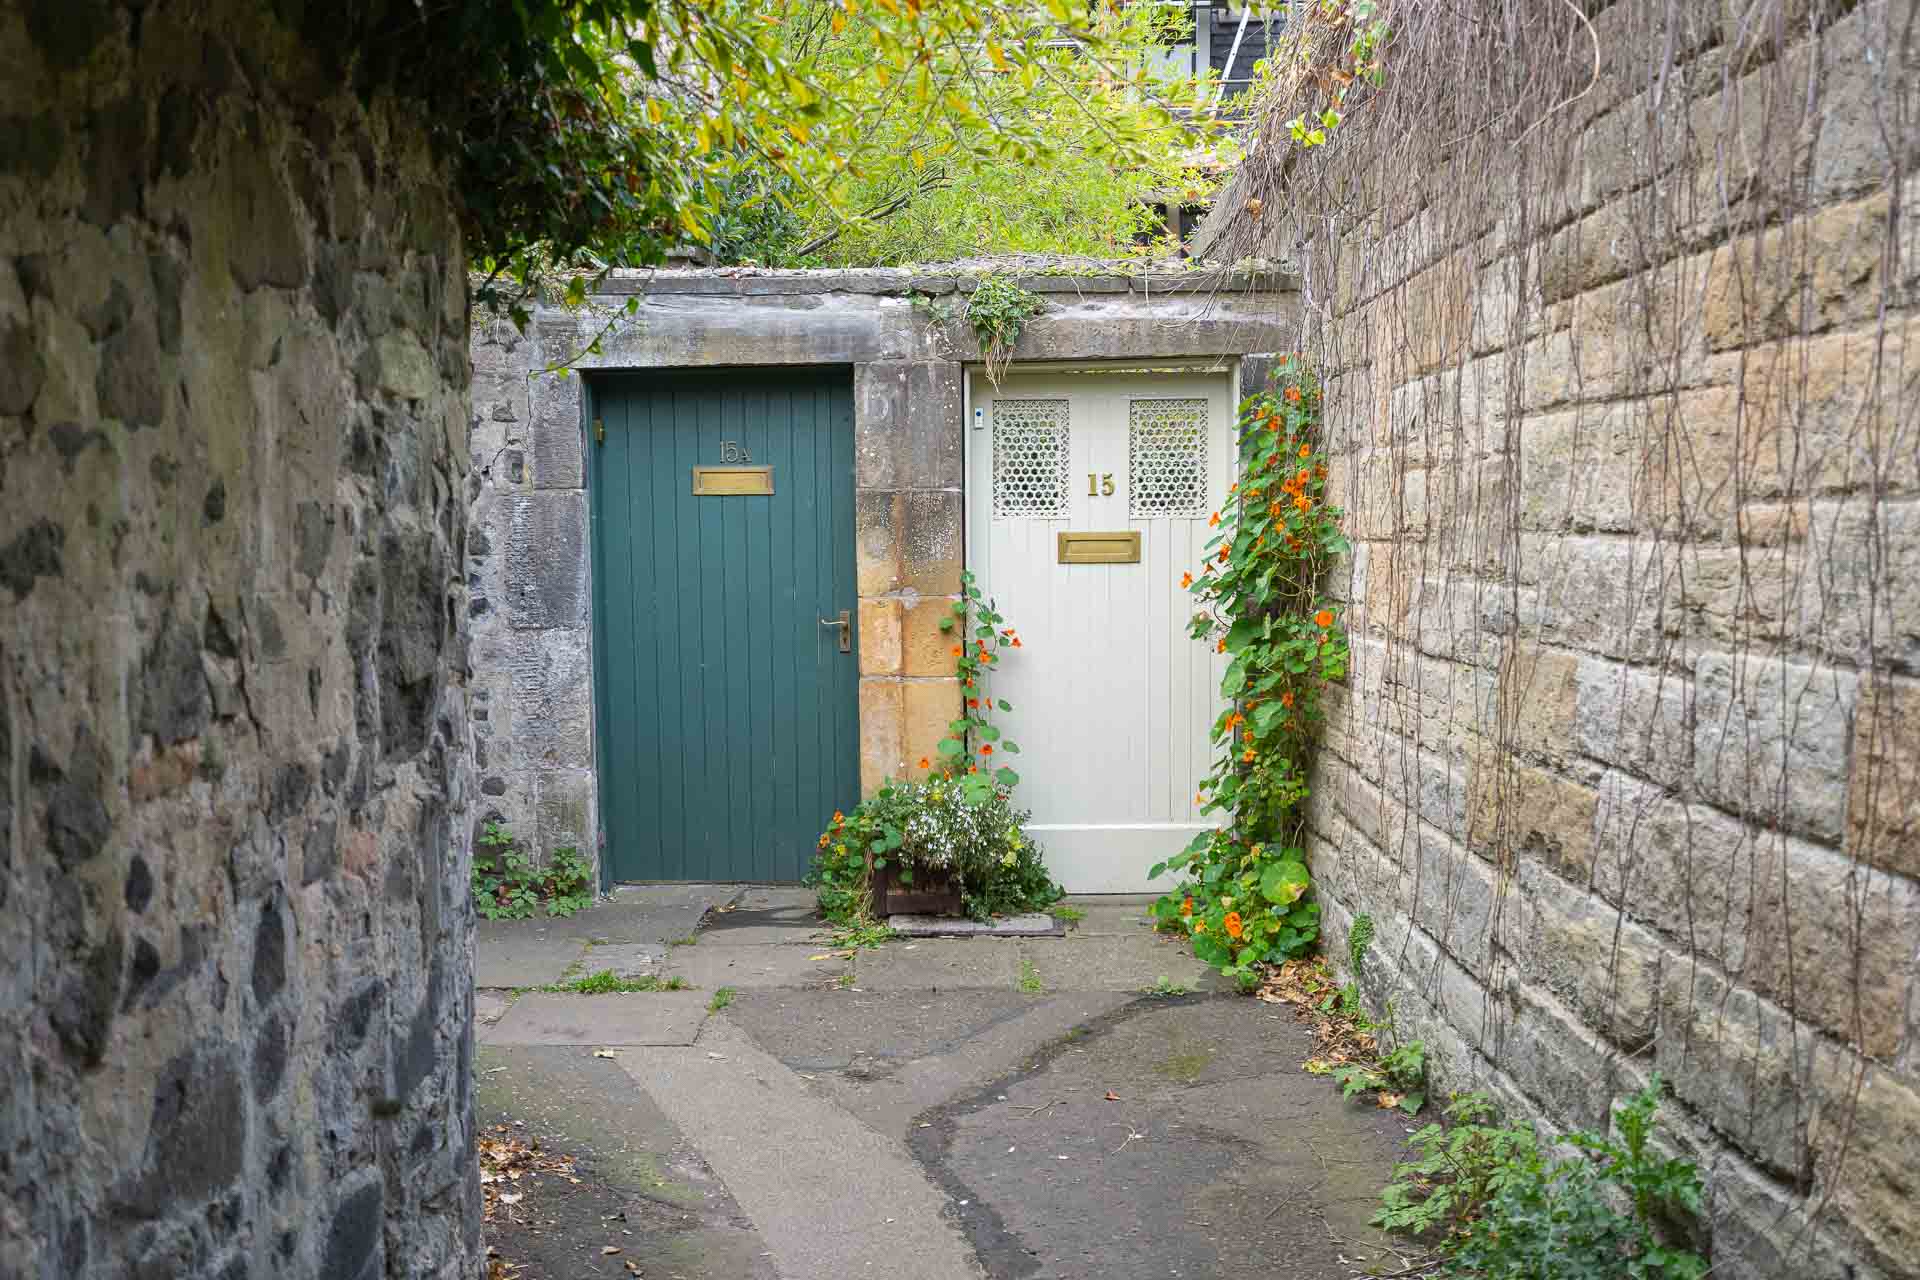 Little streets of Edinburgh with a house door in the end